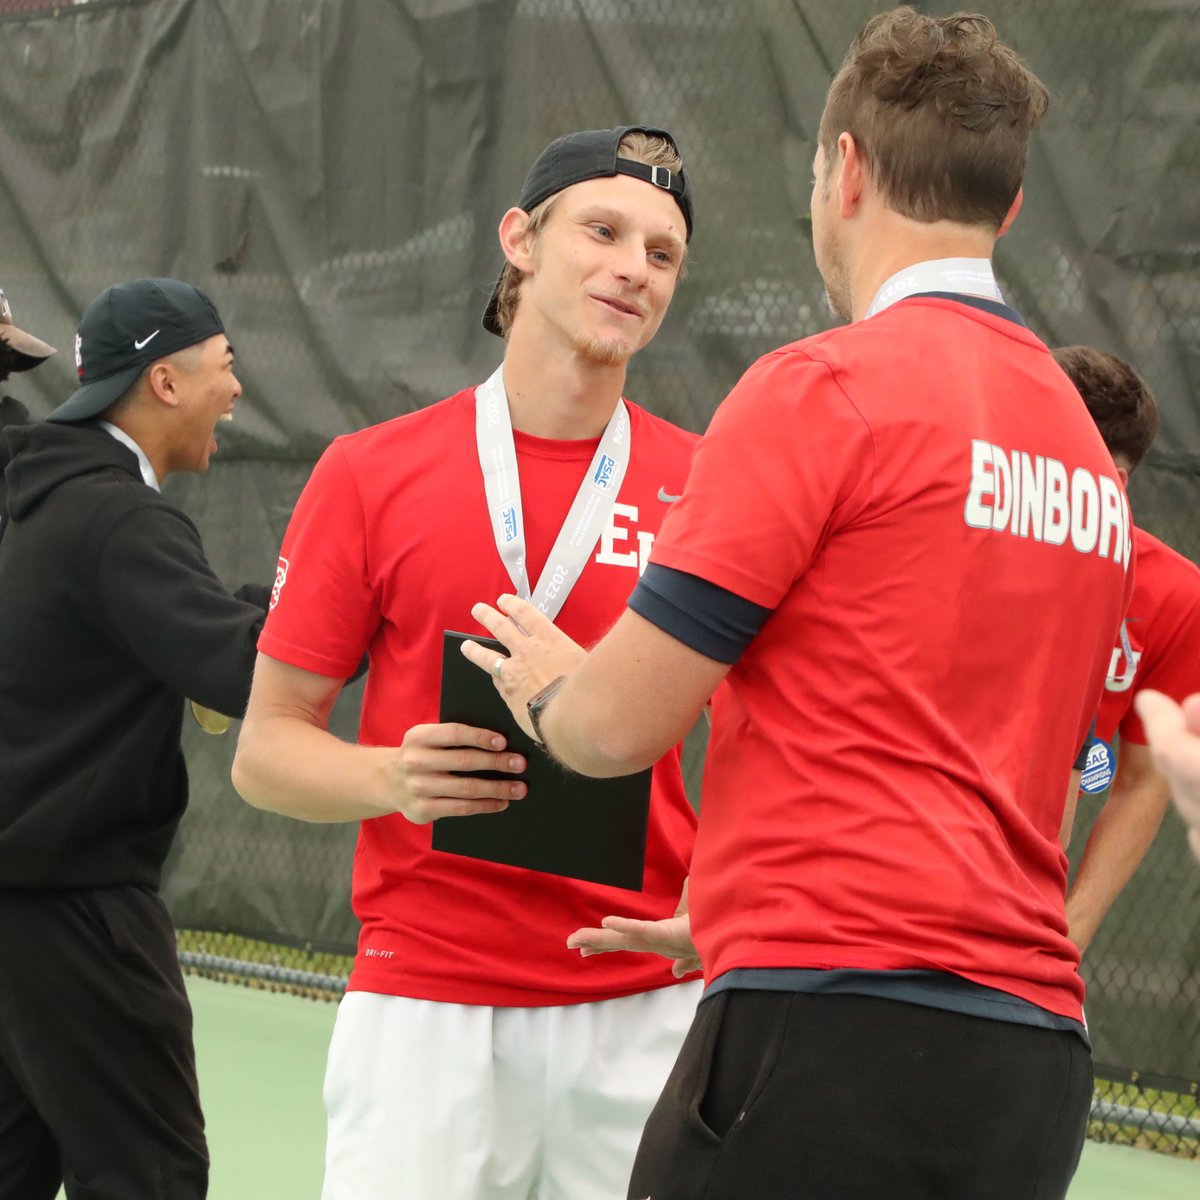 MEN'S TENNIS: After winning his doubles and singles matches on the day, @BoroAthletics' Gordan Mileusnic was named Tournament MVP, all part of Edinboro's ninth all-time PSAC Men's Tennis championship. 🔗psacsports.org/tournaments/?i… #PSACProud